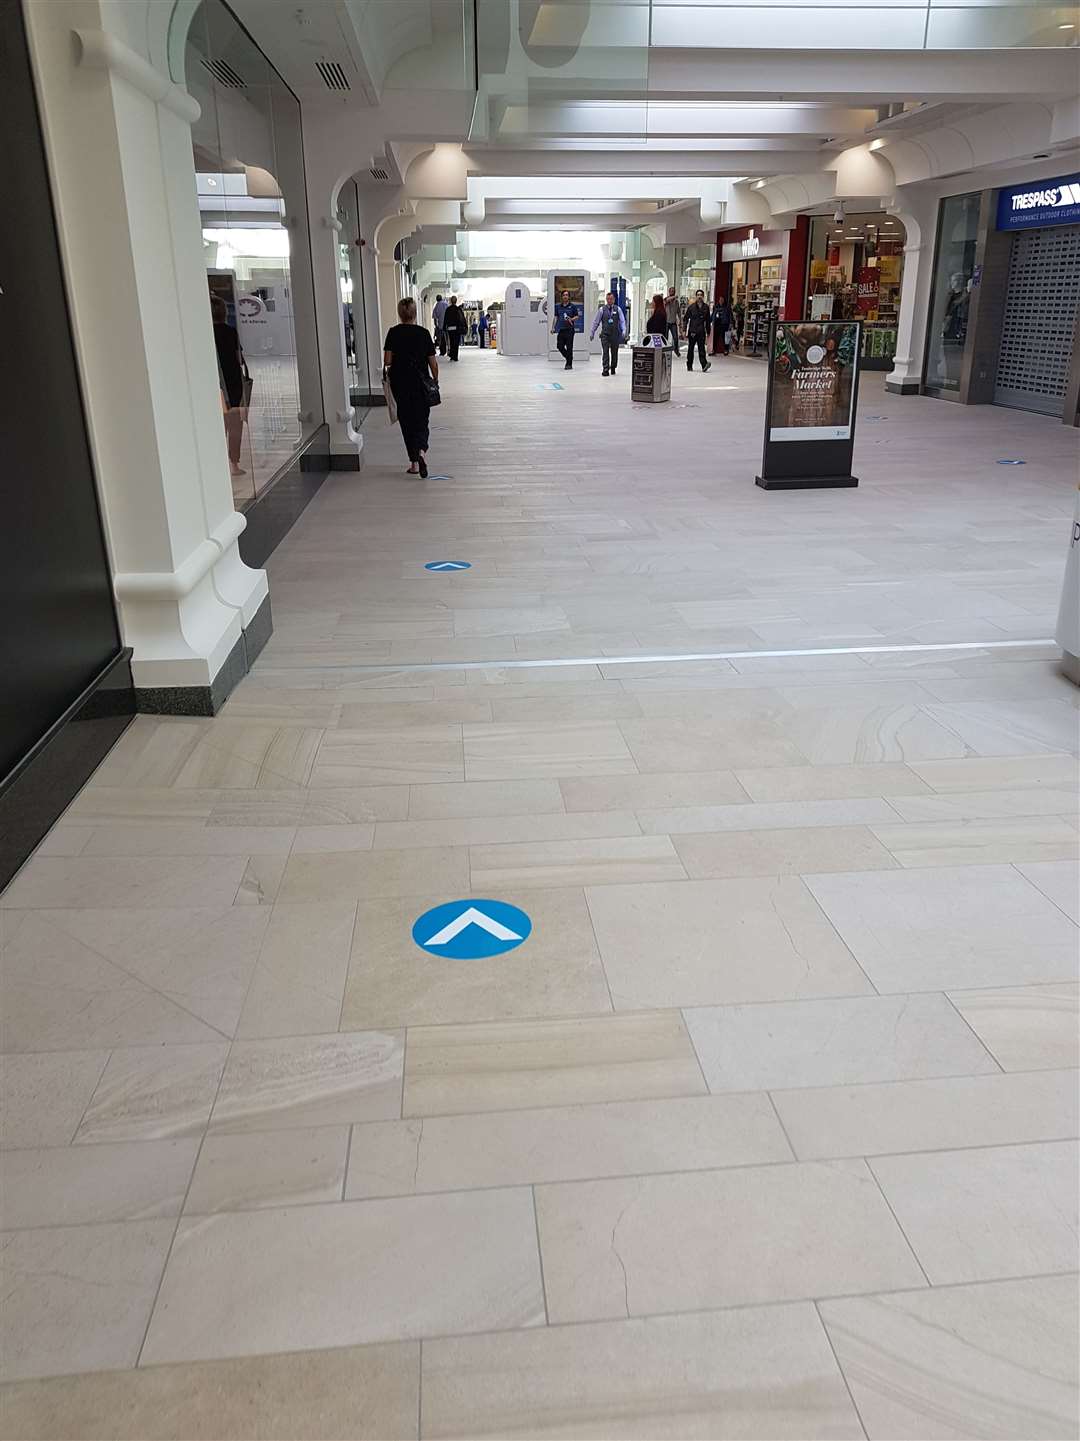 One-way signs on the floor of the Royal Victoria shopping mall in Tunbridge Wells